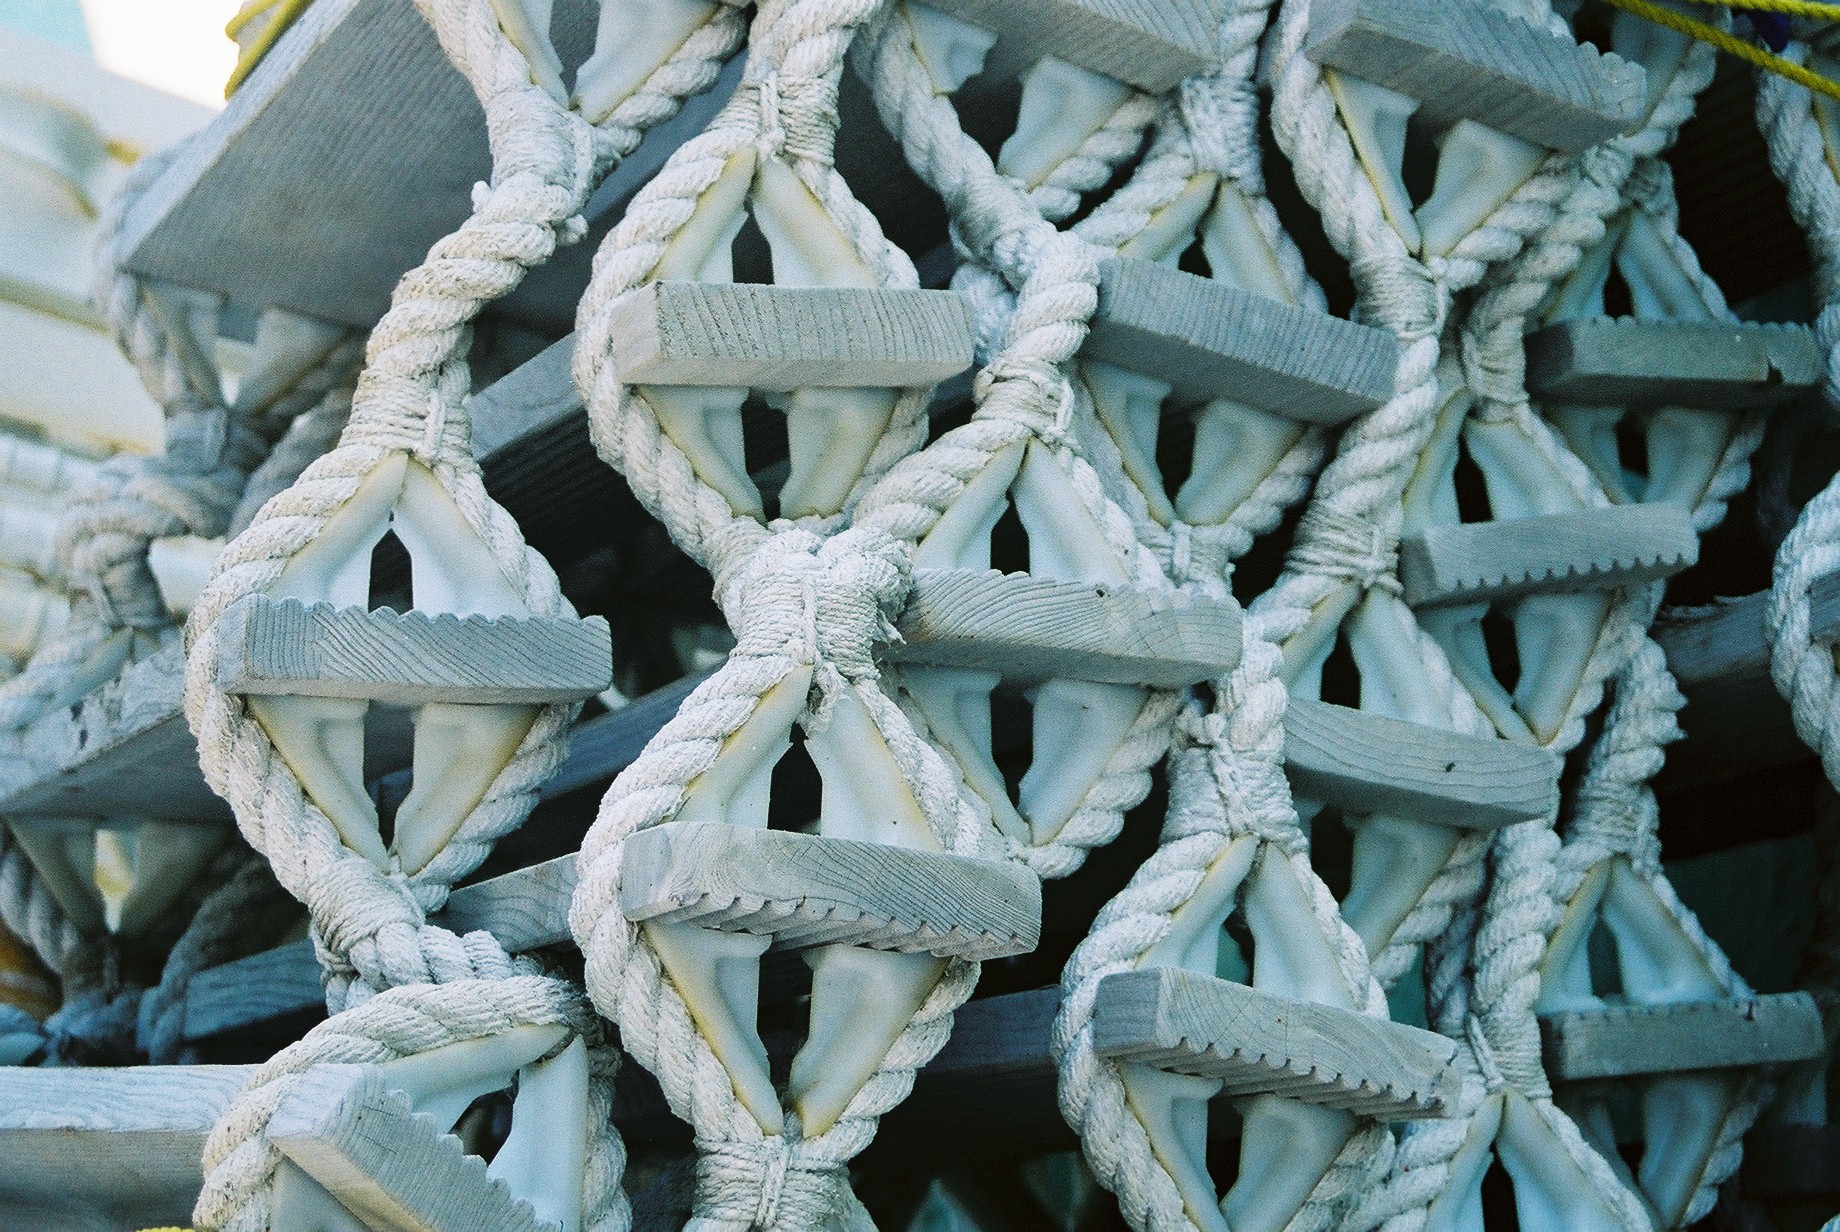 Interesting photo of the rope ladder on the ferry boat